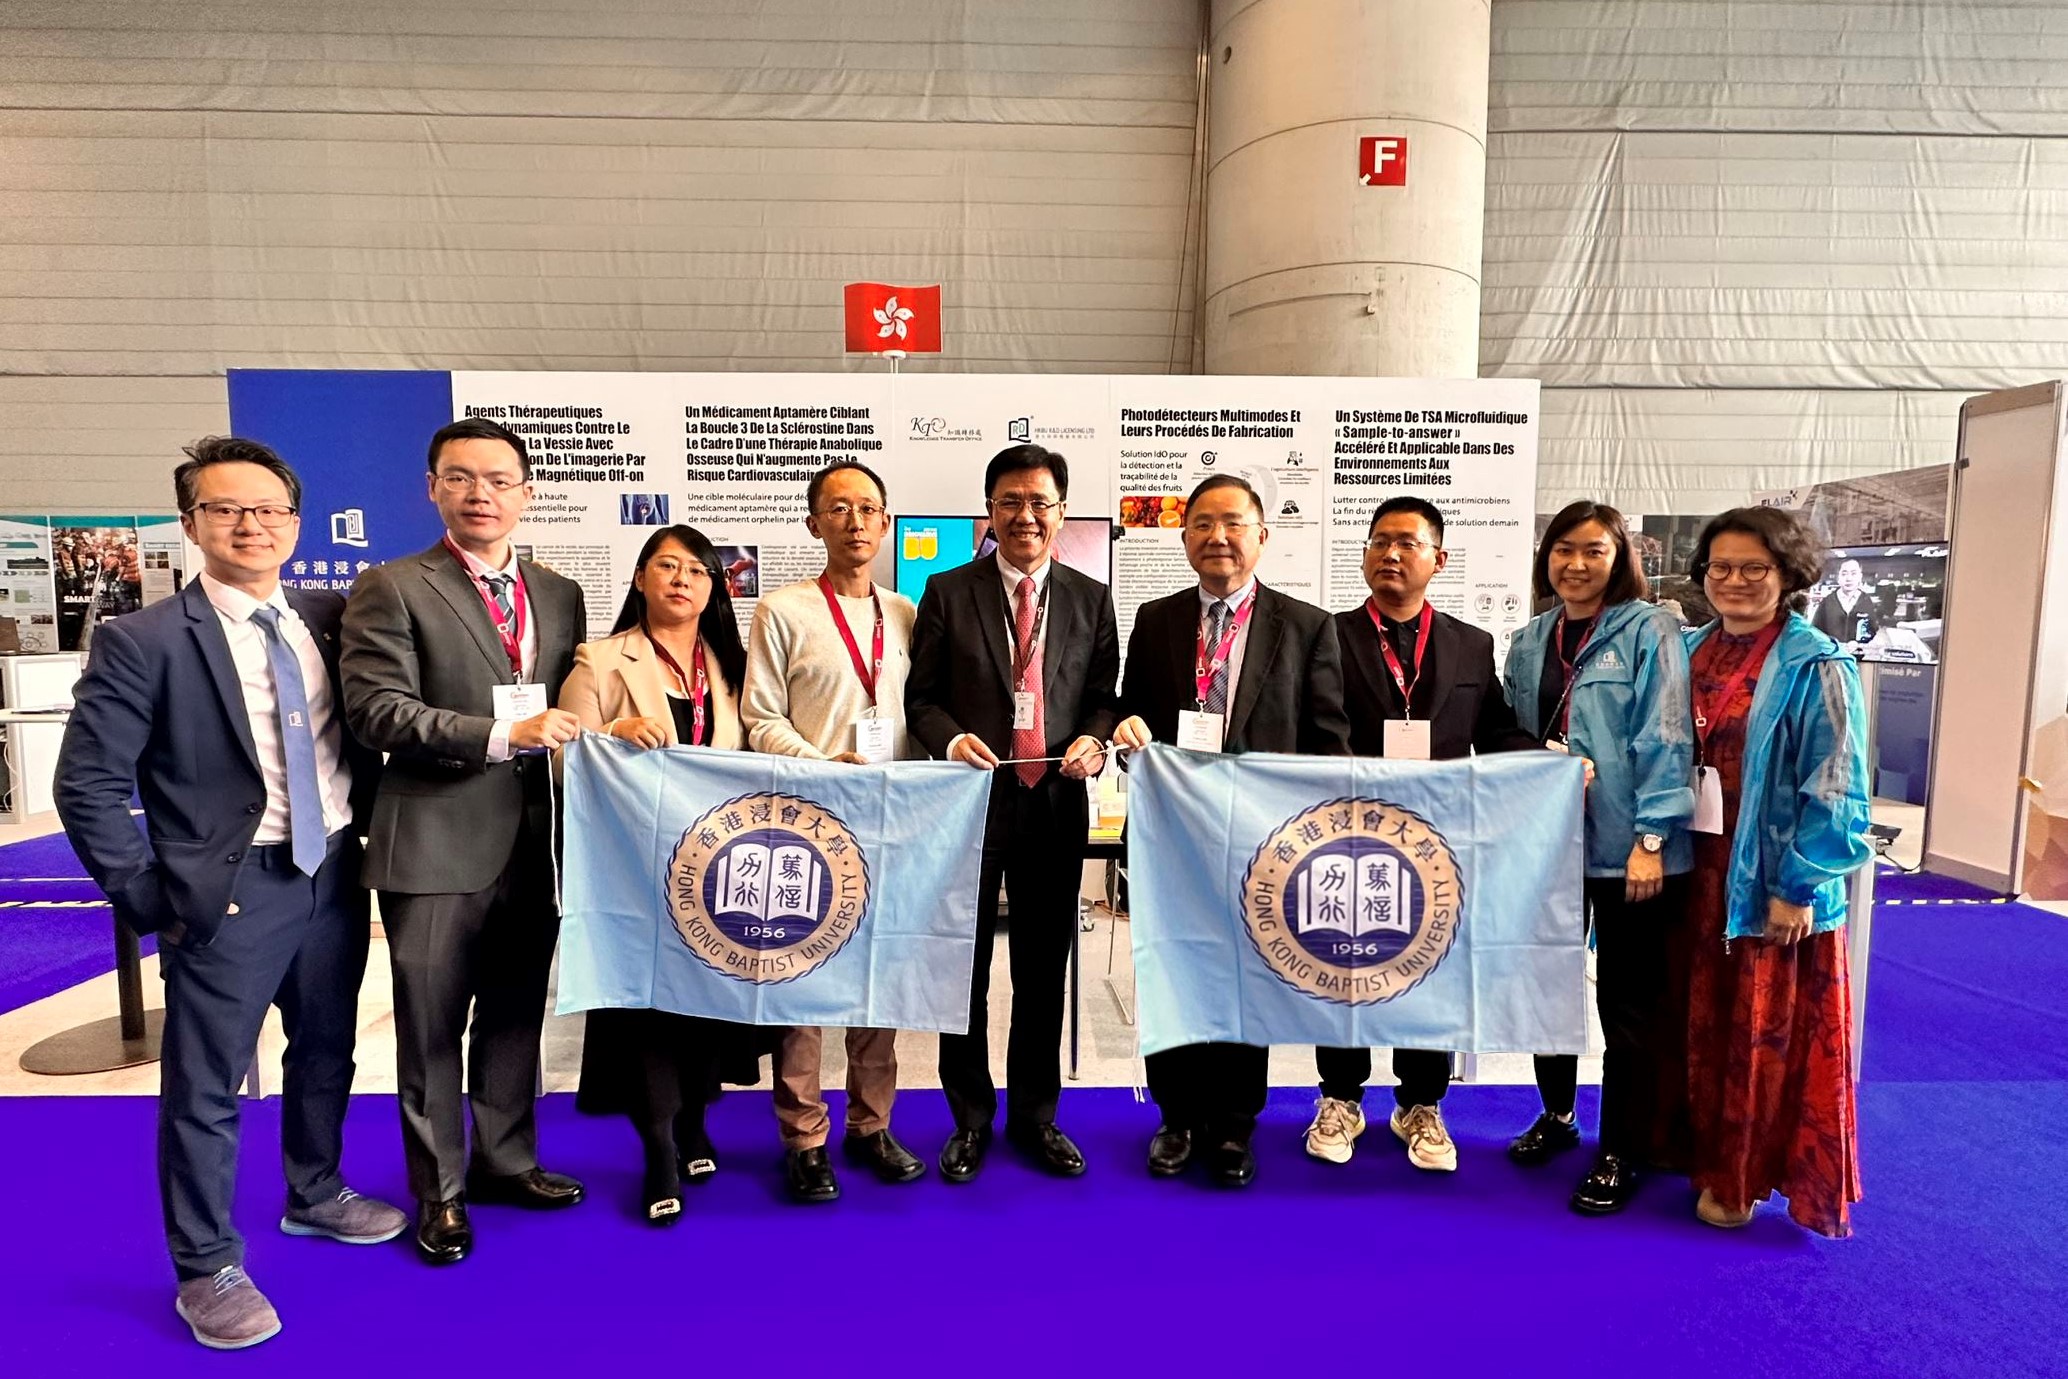 Professor Sun Dong, Secretary for Innovation, Technology and Industry of the HKSAR Government (middle) visits HKBU’s booth at the 48th International Exhibition of Inventions of Geneva.